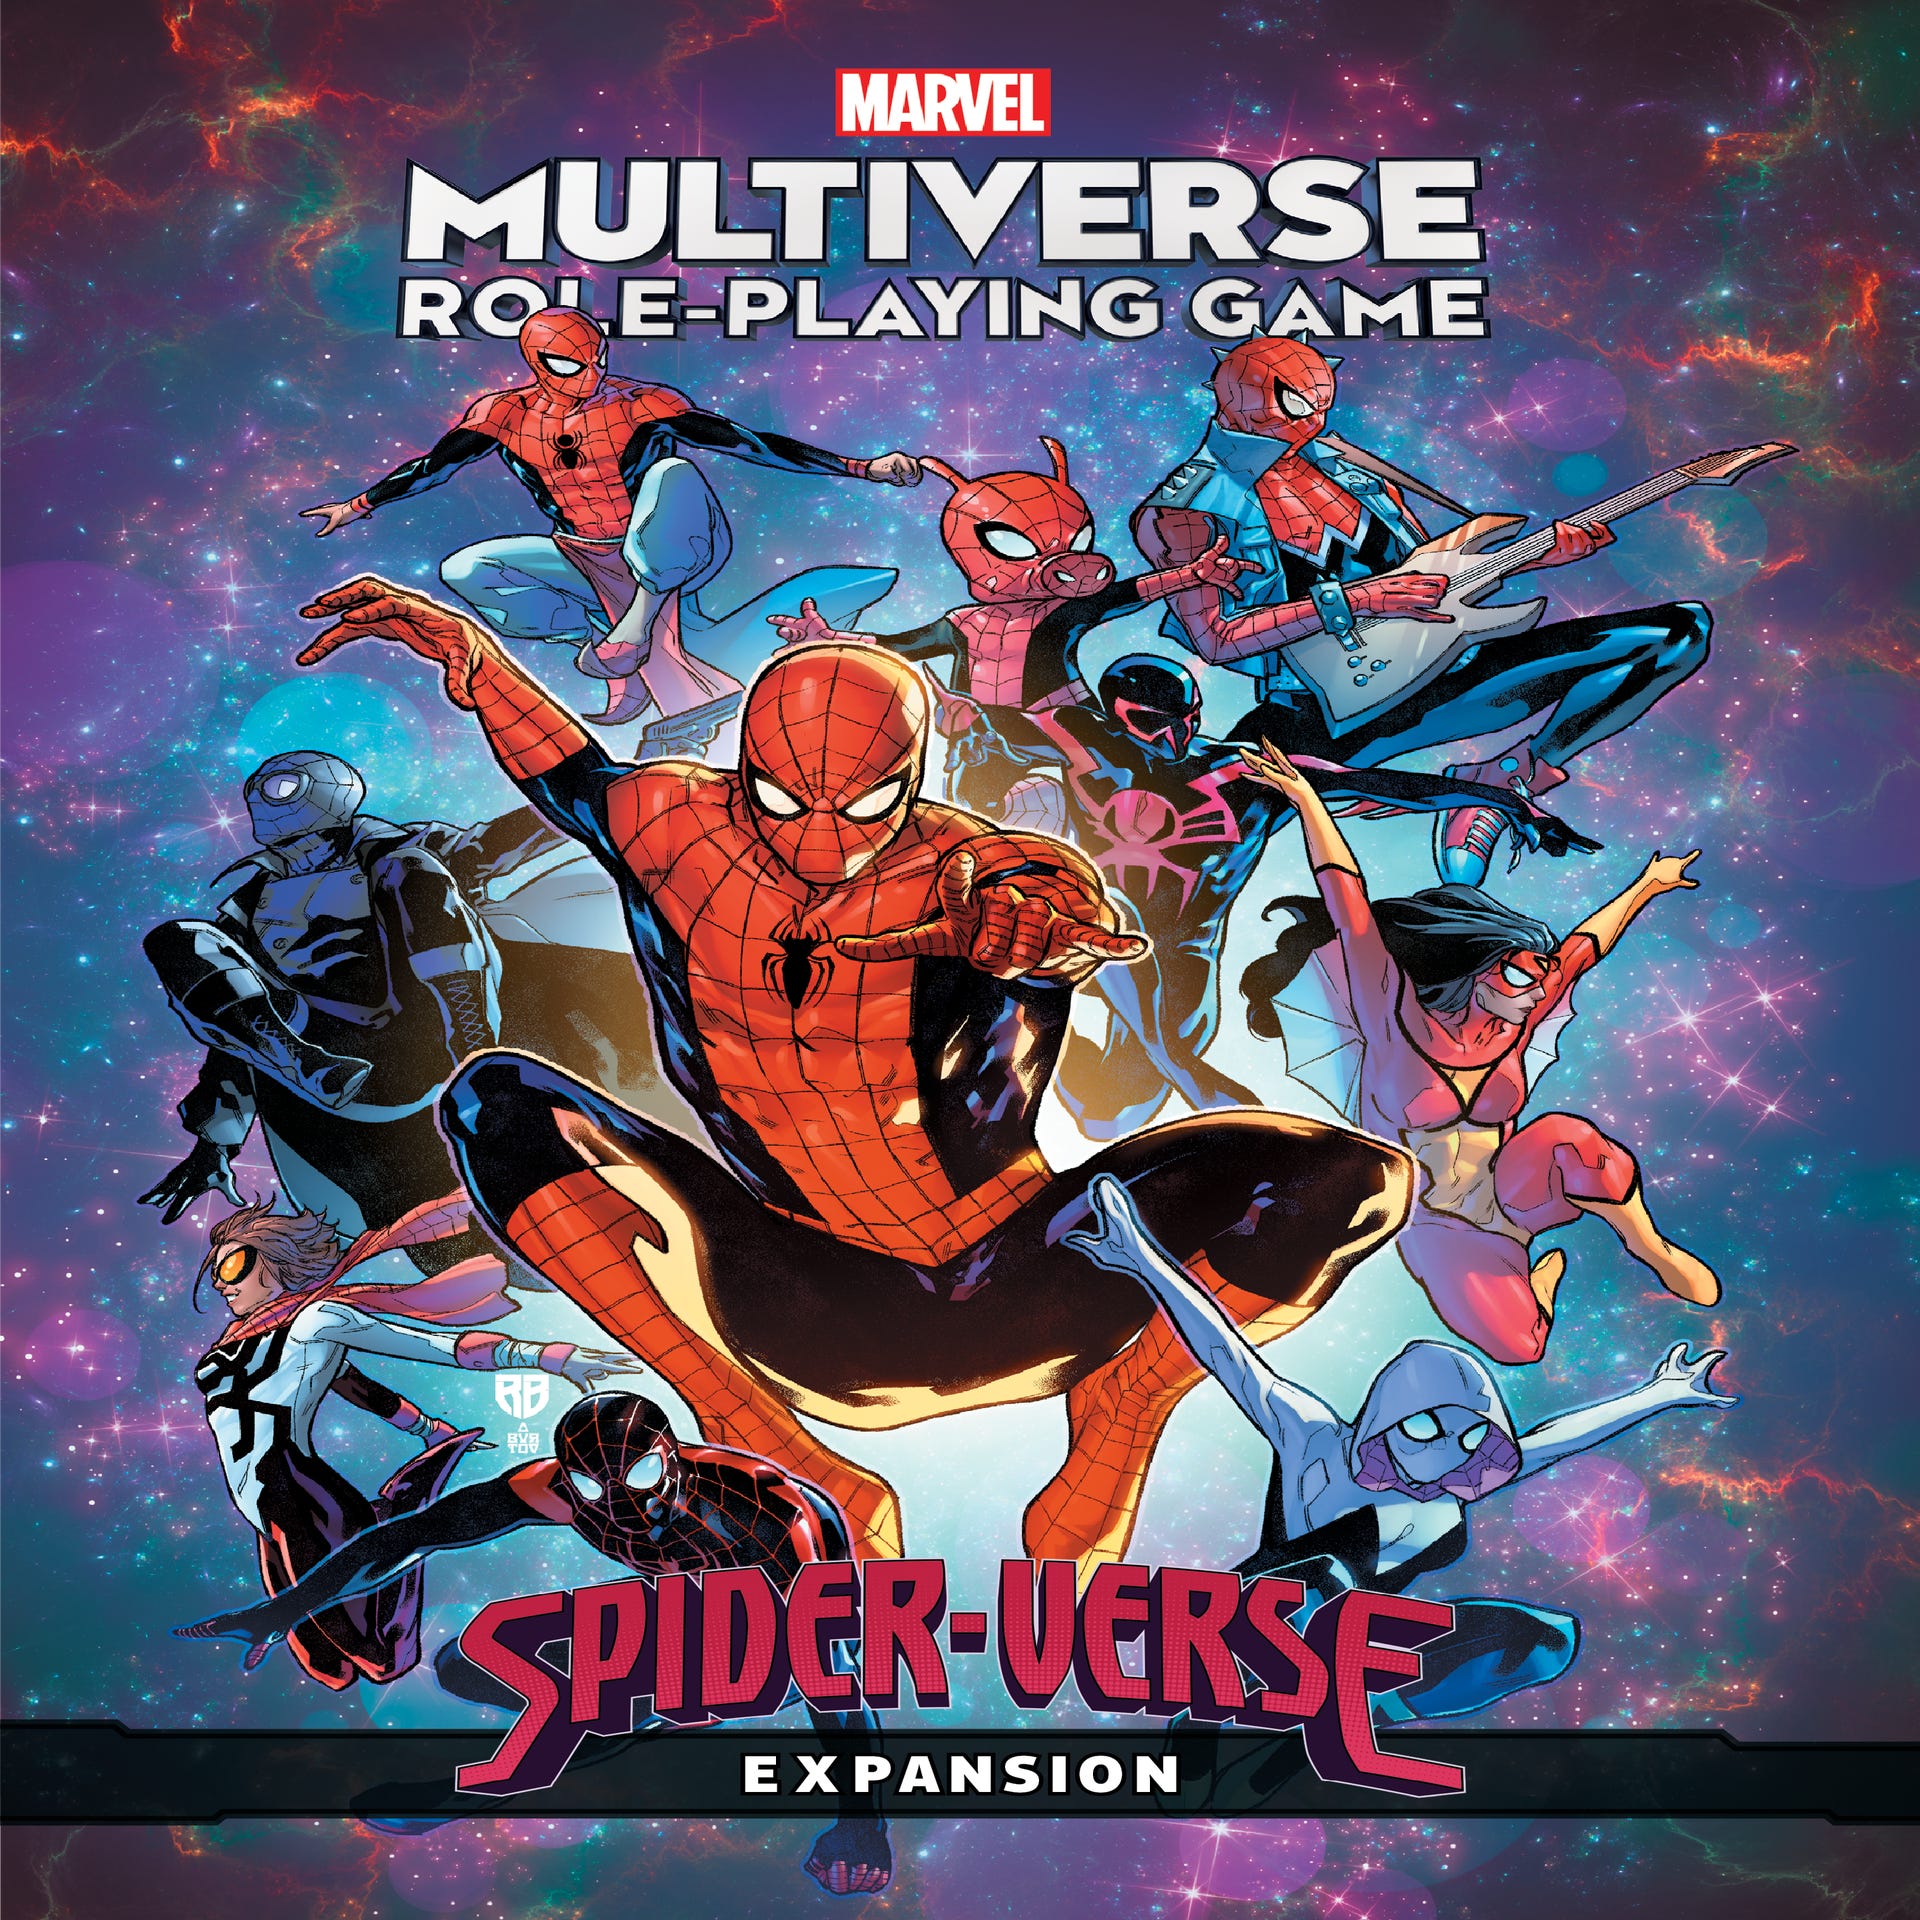 Marvel Multiverse slings across the SpiderVerse in new expansion to